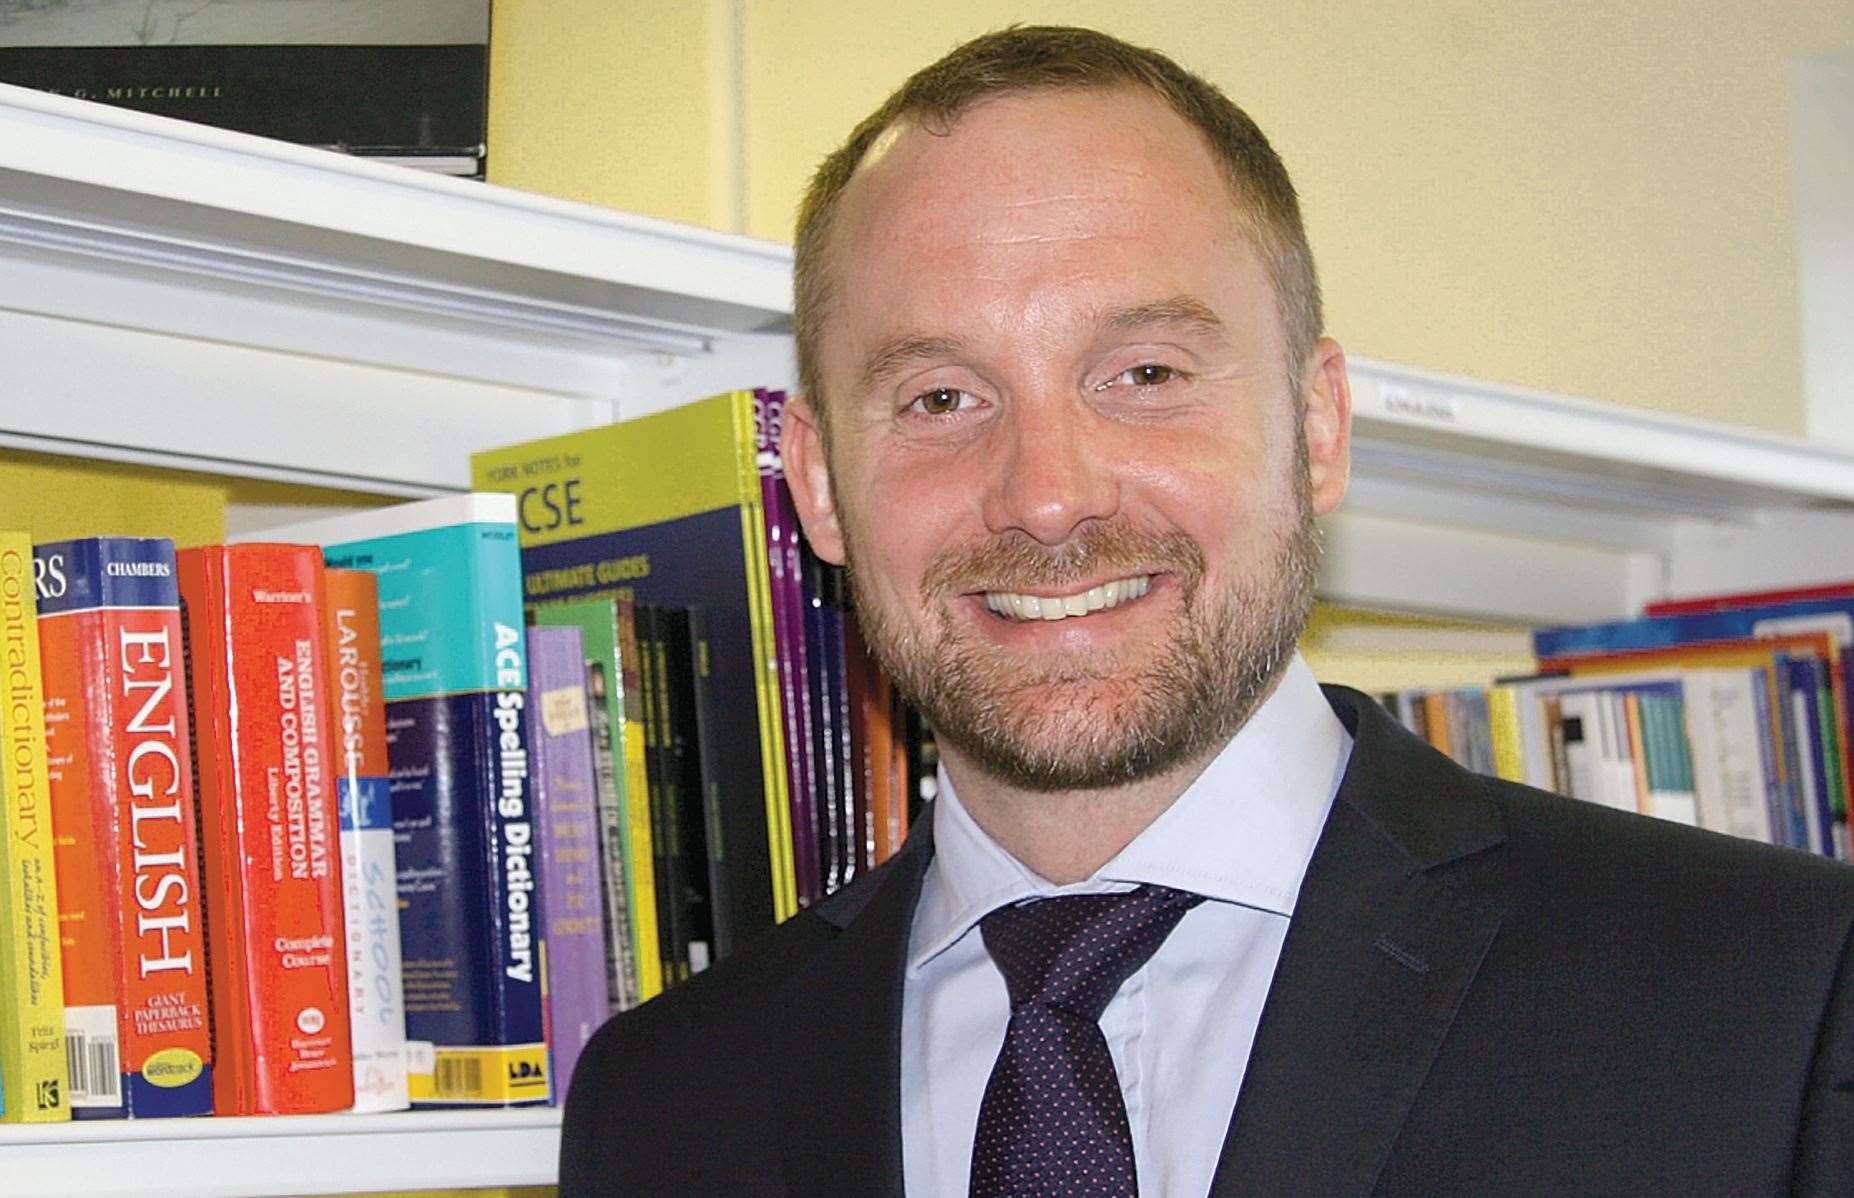 Jon Watson, the executive principal of the Canterbury Academy, has questioned Ofsted’s rating